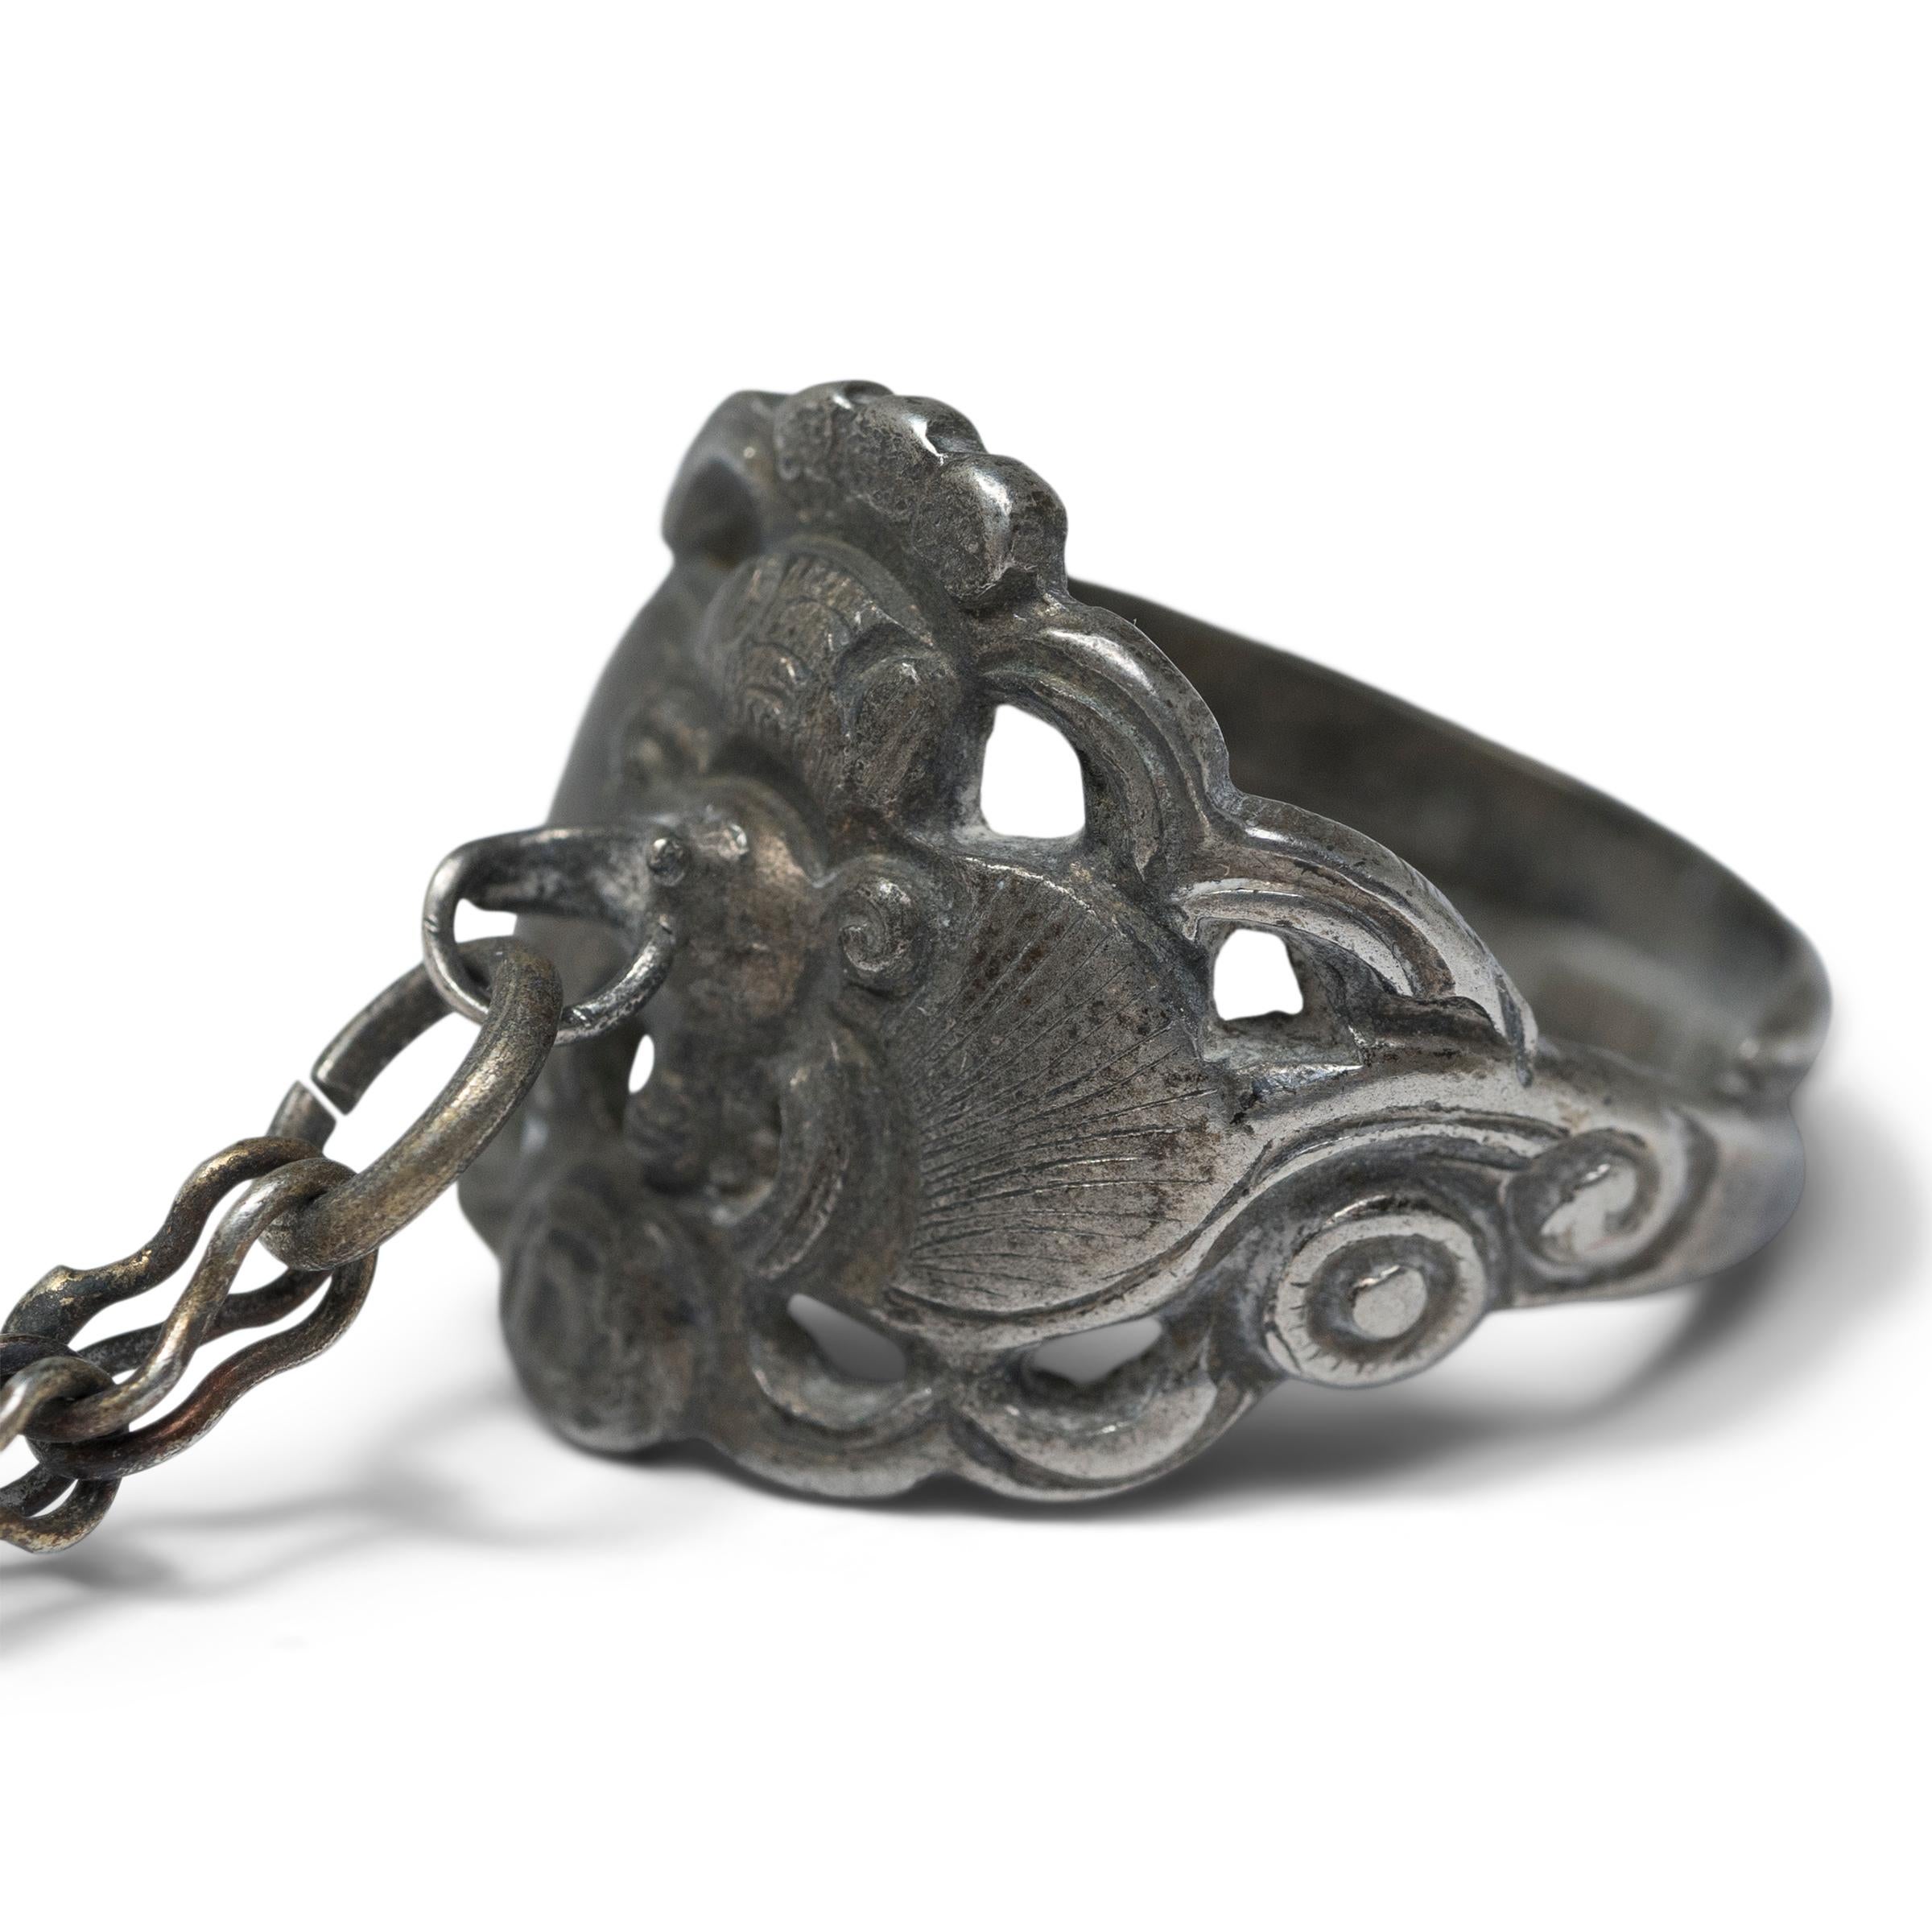 Dated to the late 19th century, this silver charm ring was believed to protect the wearer from bad luck and malevolent spirits. The ring is decorated in open relief with a large bat surrounded by swirling clouds. A visual metaphor for the word